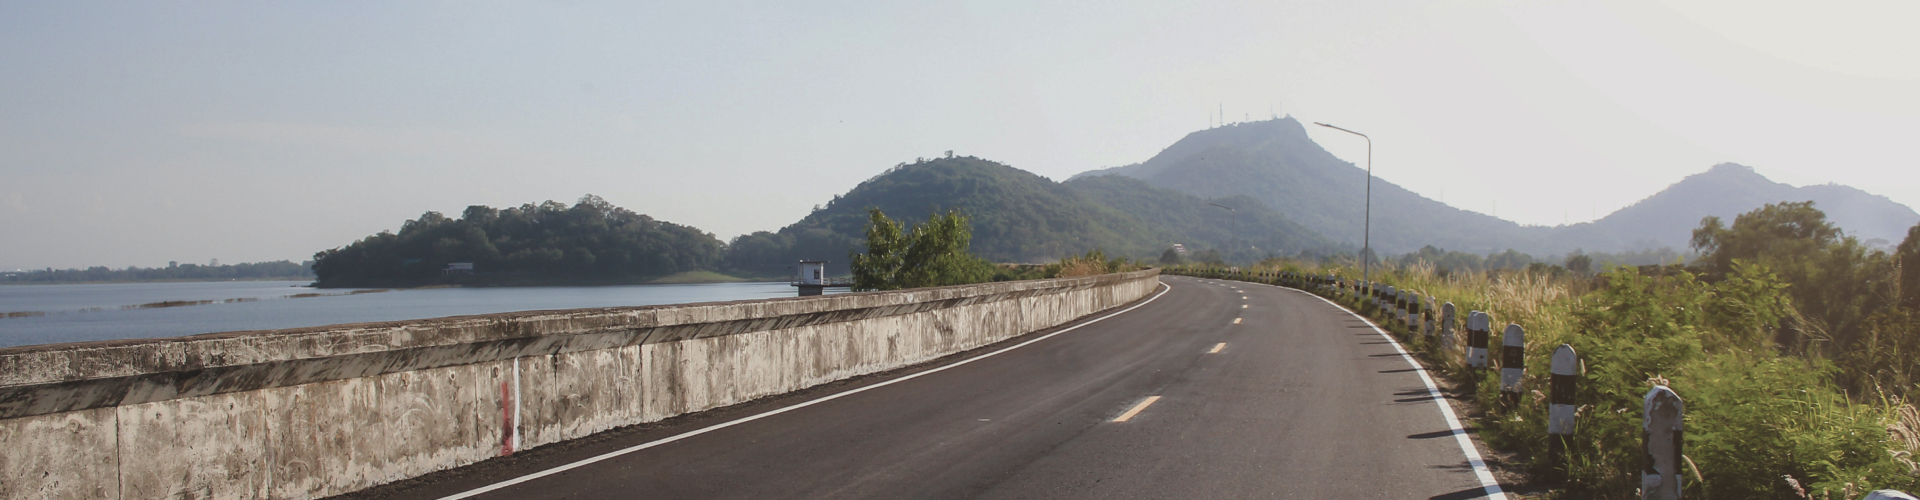 Long shot of a coastal highway with hills in the distance